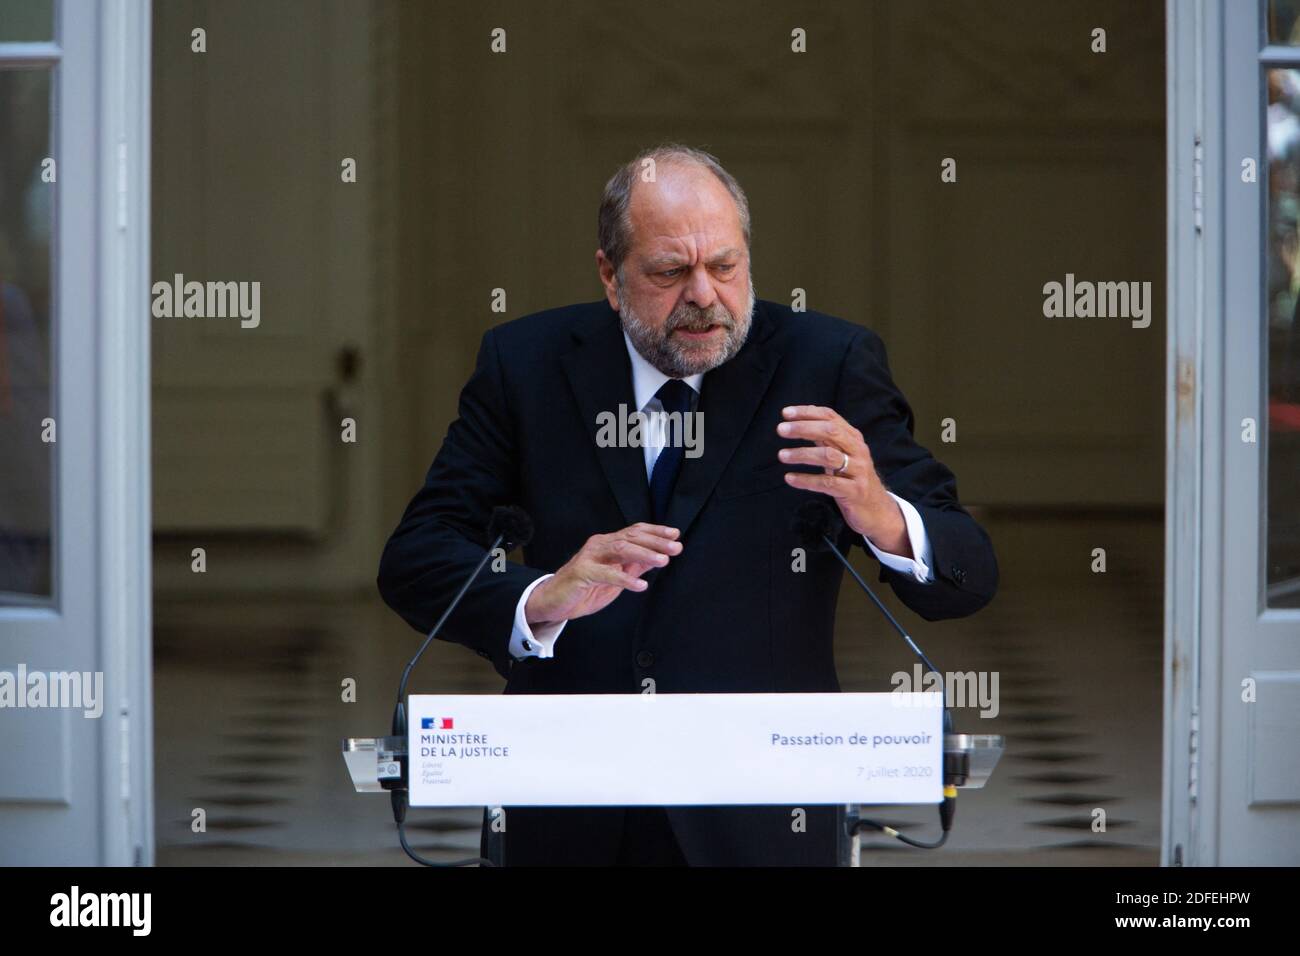 Newly appointed French Justice minister and lawyer Eric Dupond-Moretti  delivers a speech during the handover ceremony at the French Justice  ministry in Paris on July 7, 2020 following the French cabinet reshuffle.